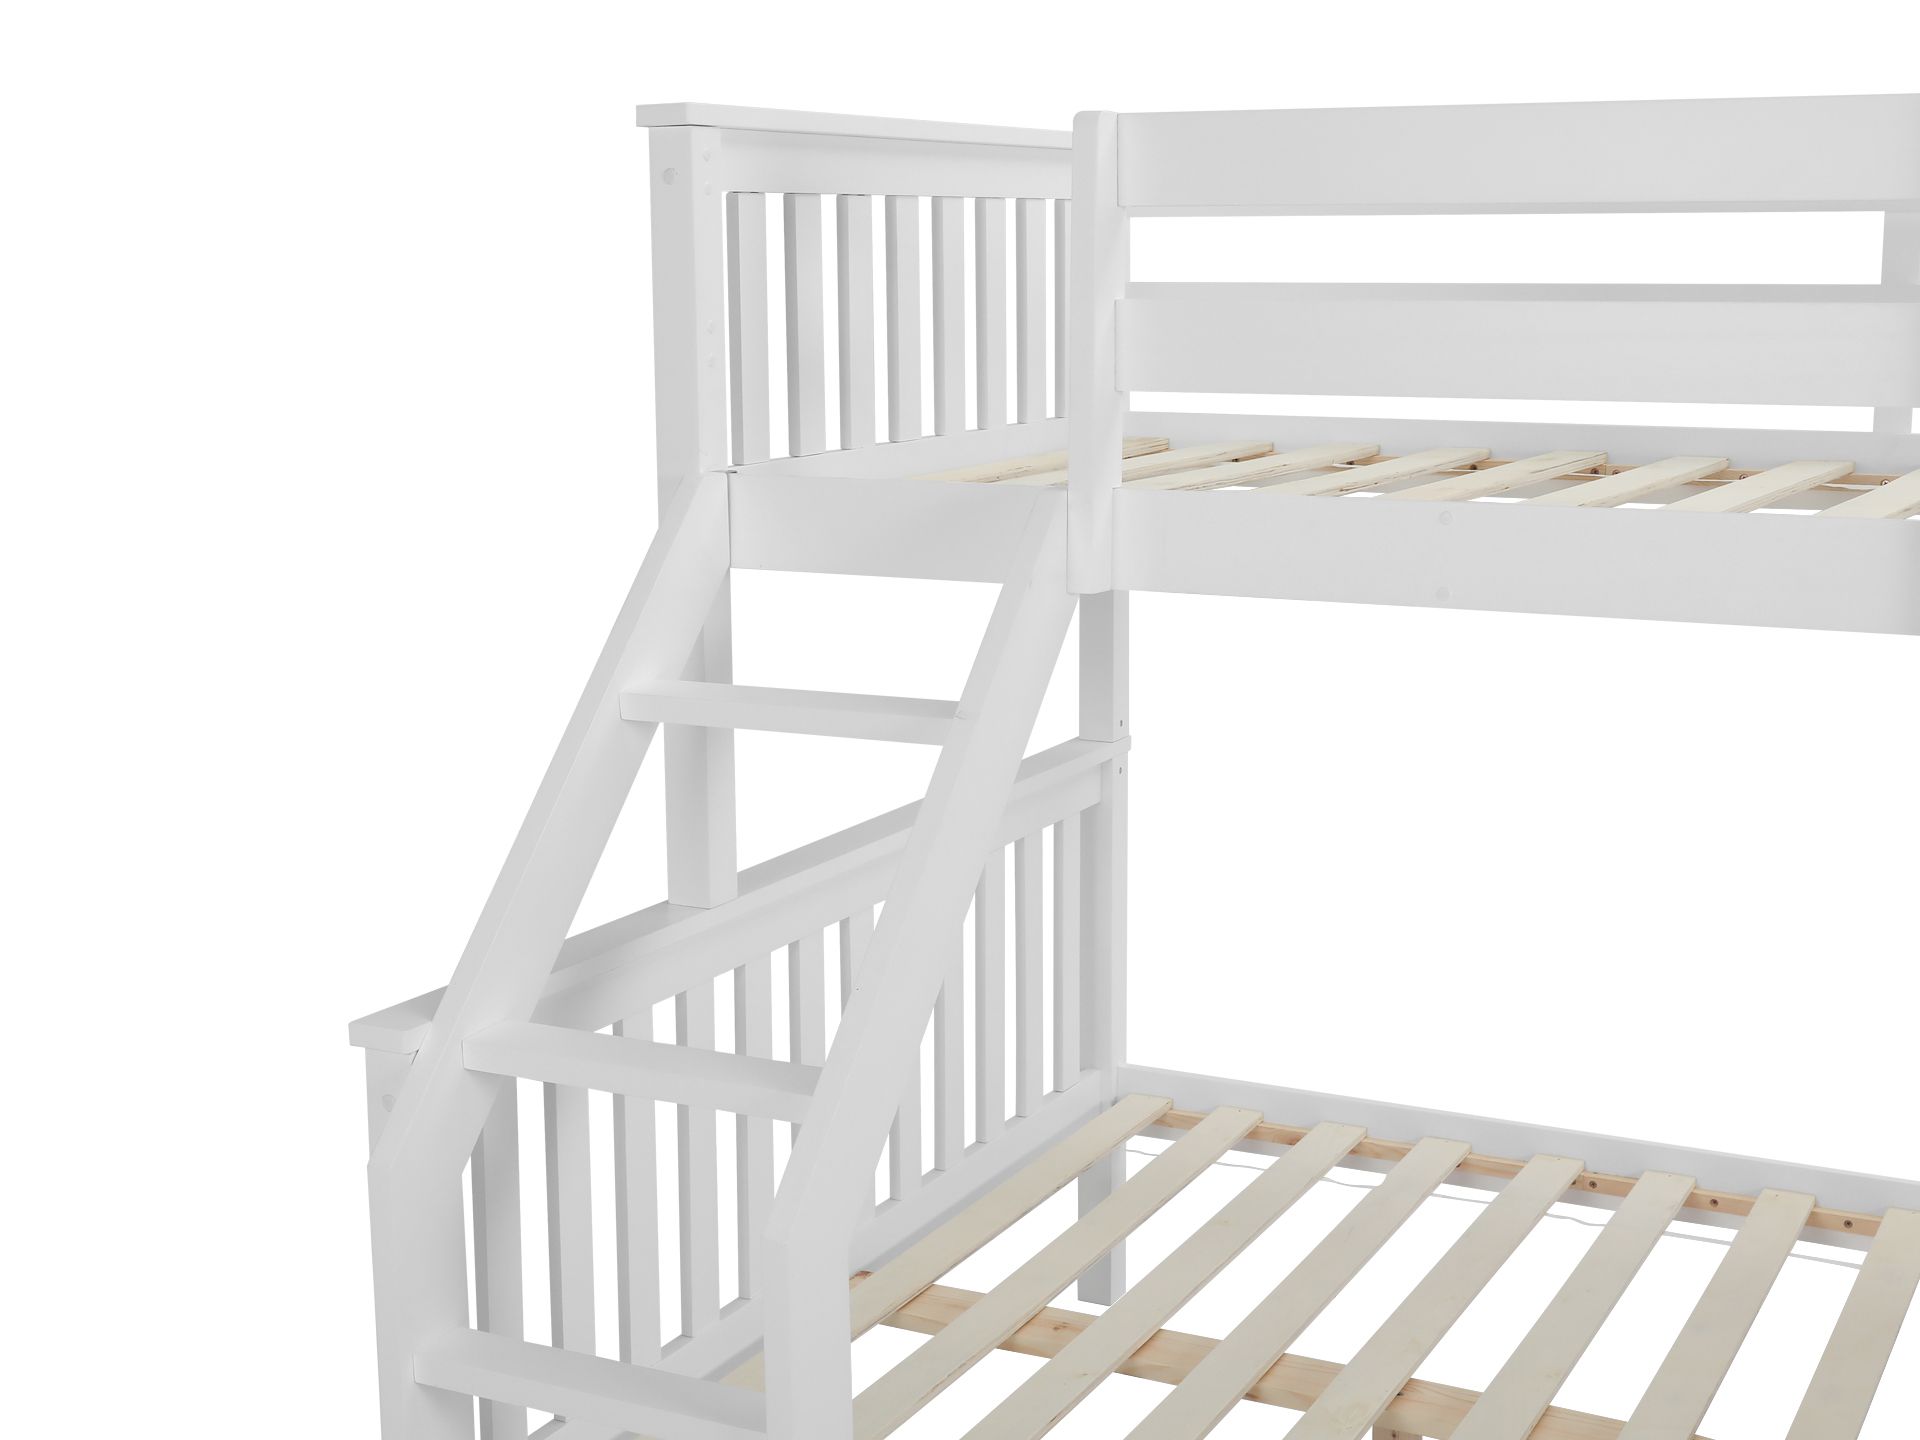 Dome Wooden Triple Bunk Bed - White